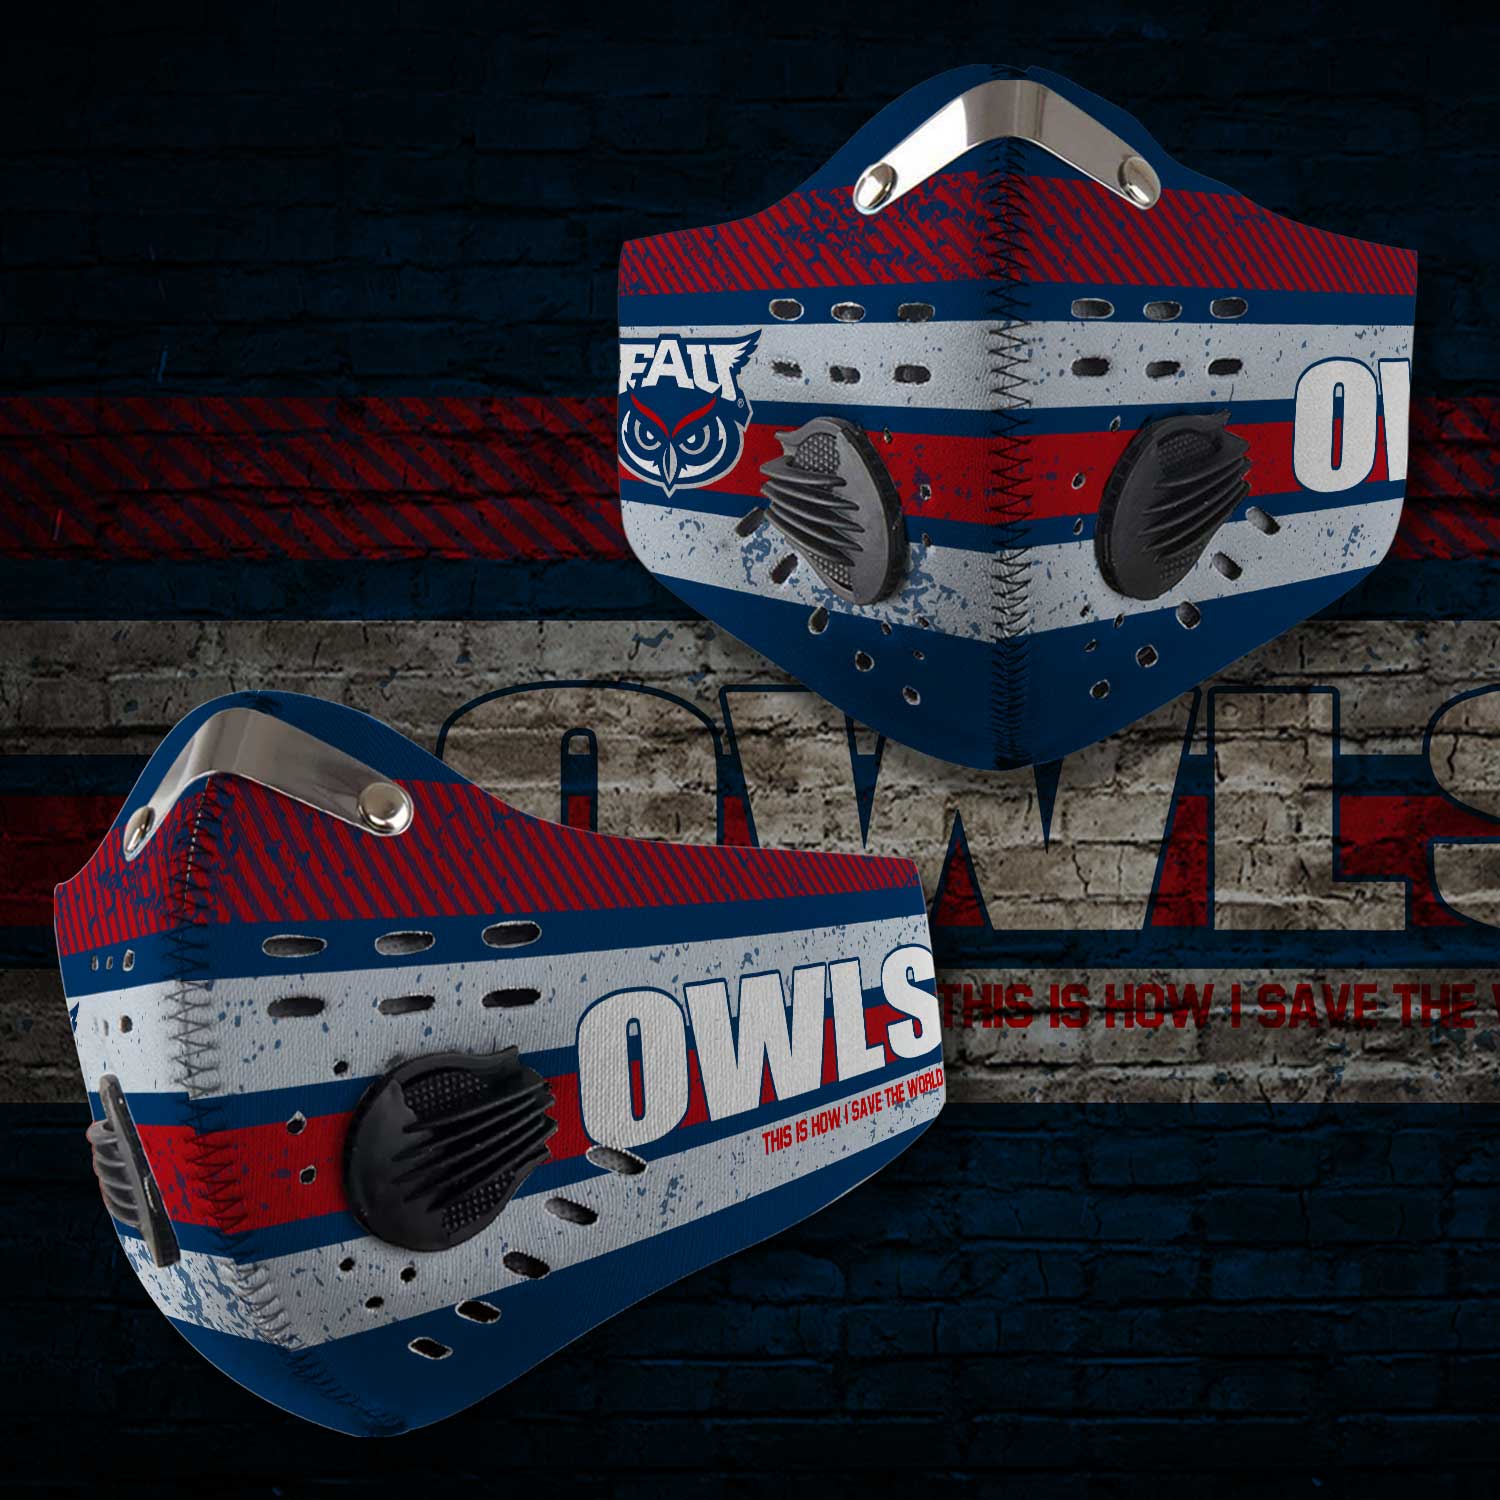 Florida atlantic owls this is how i save the world face mask